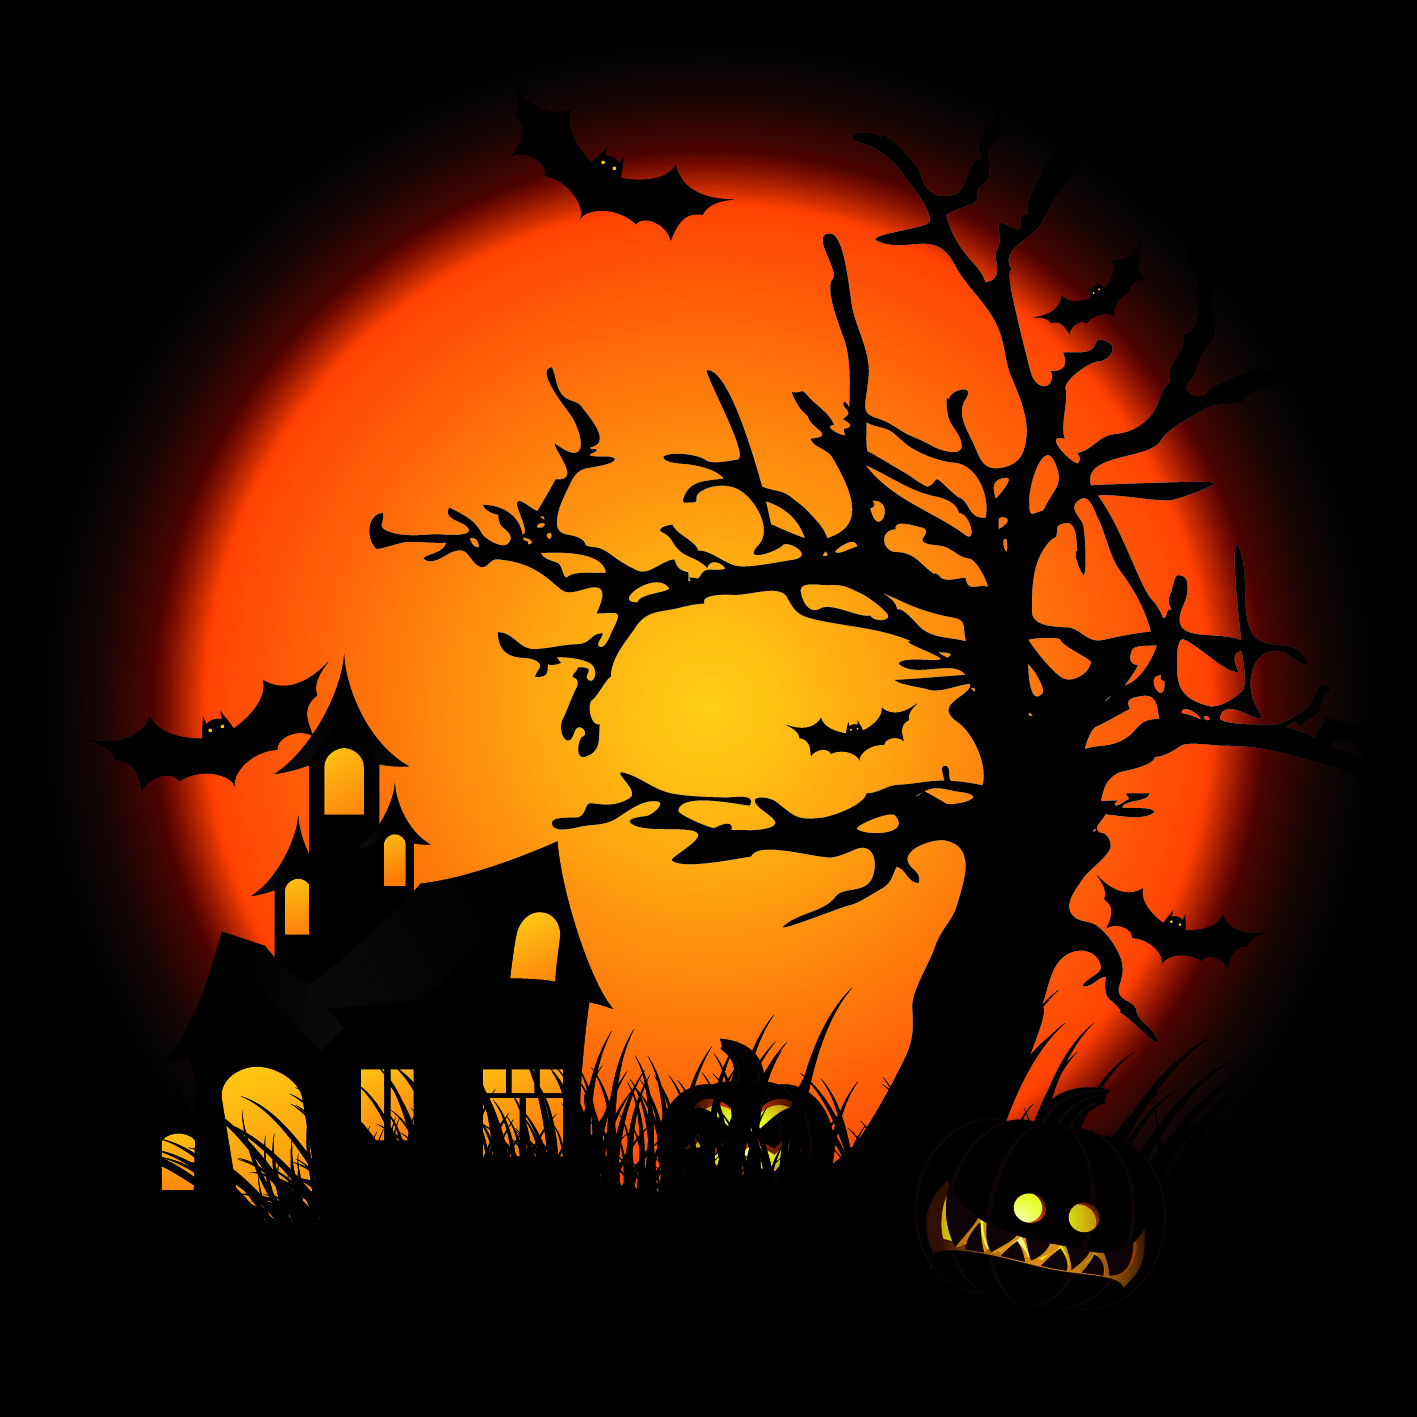 ... Halloween Images Free Cli